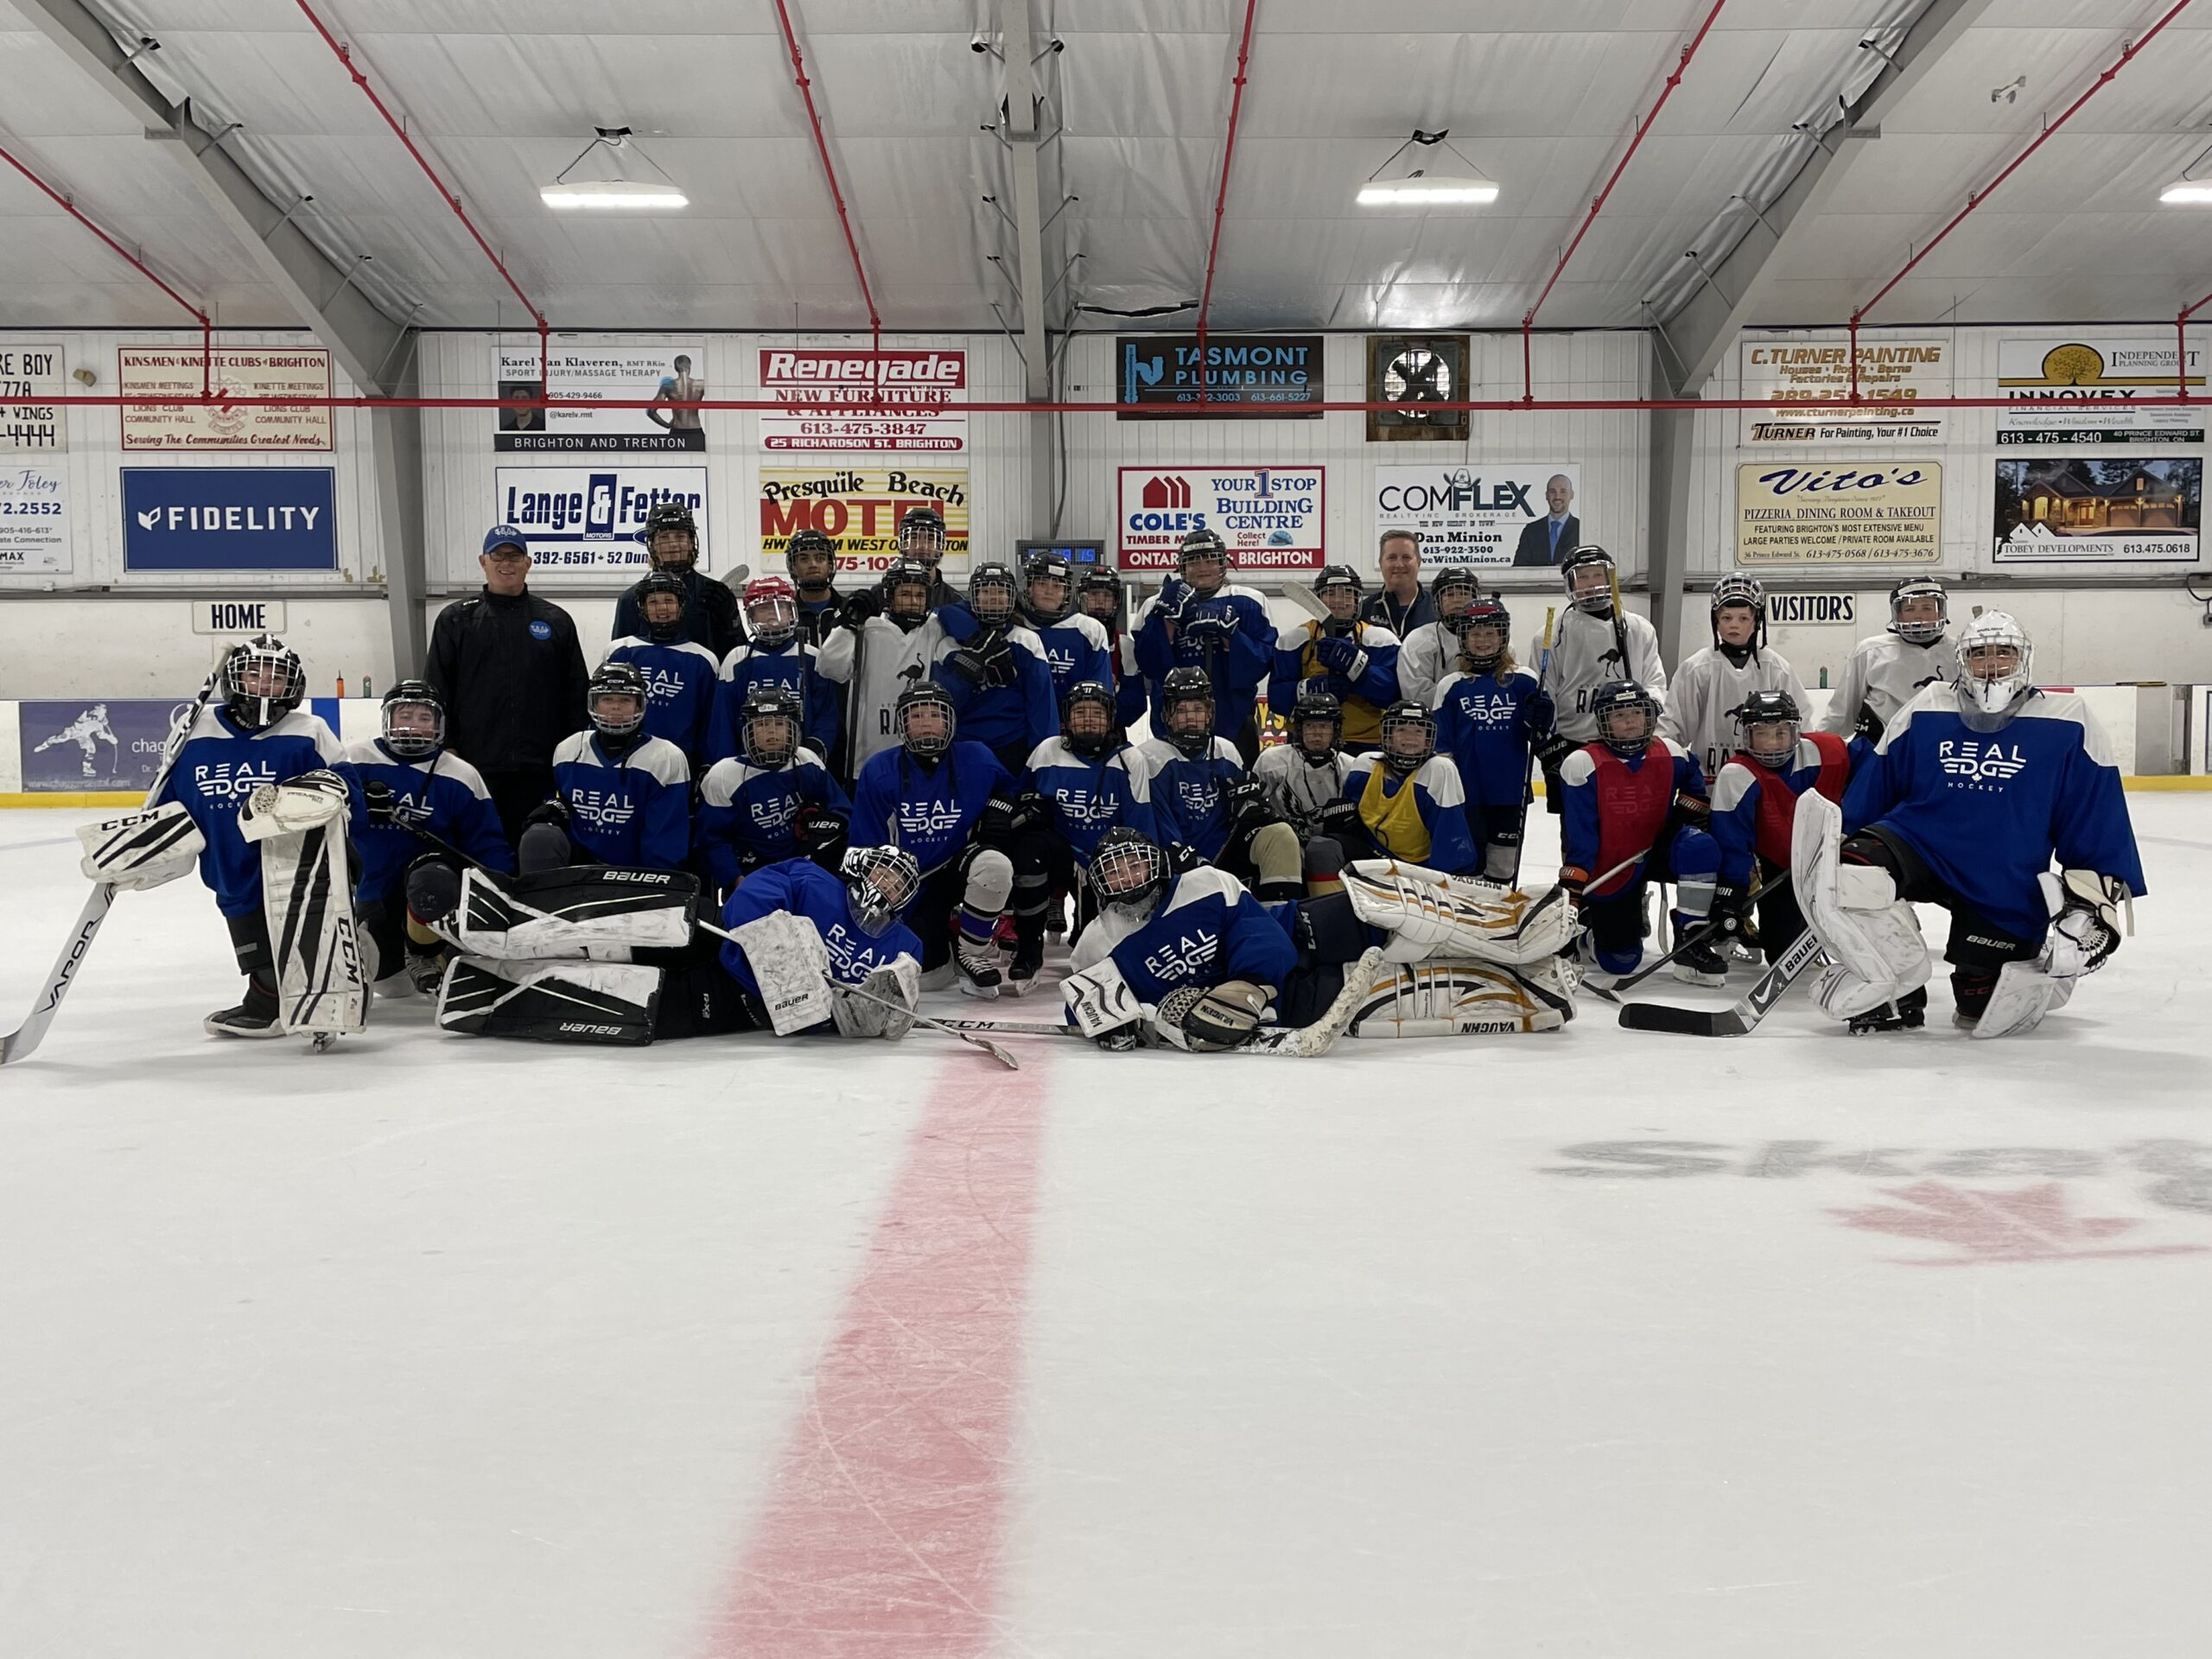 group picture of hockey players on the ice